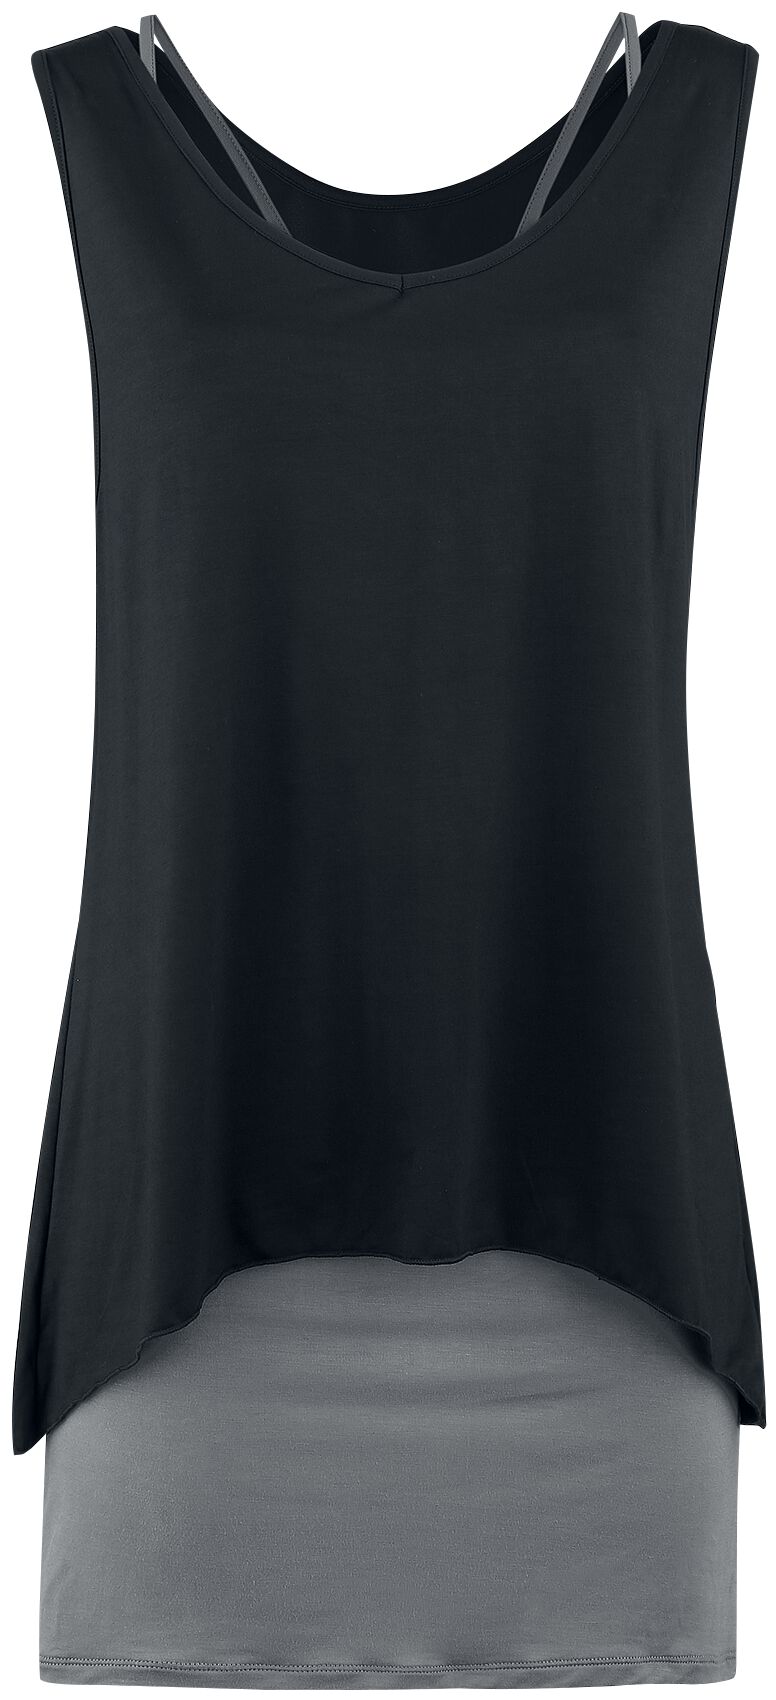 Black Premium by EMP Two-In-One Dress Short dress black charcoal